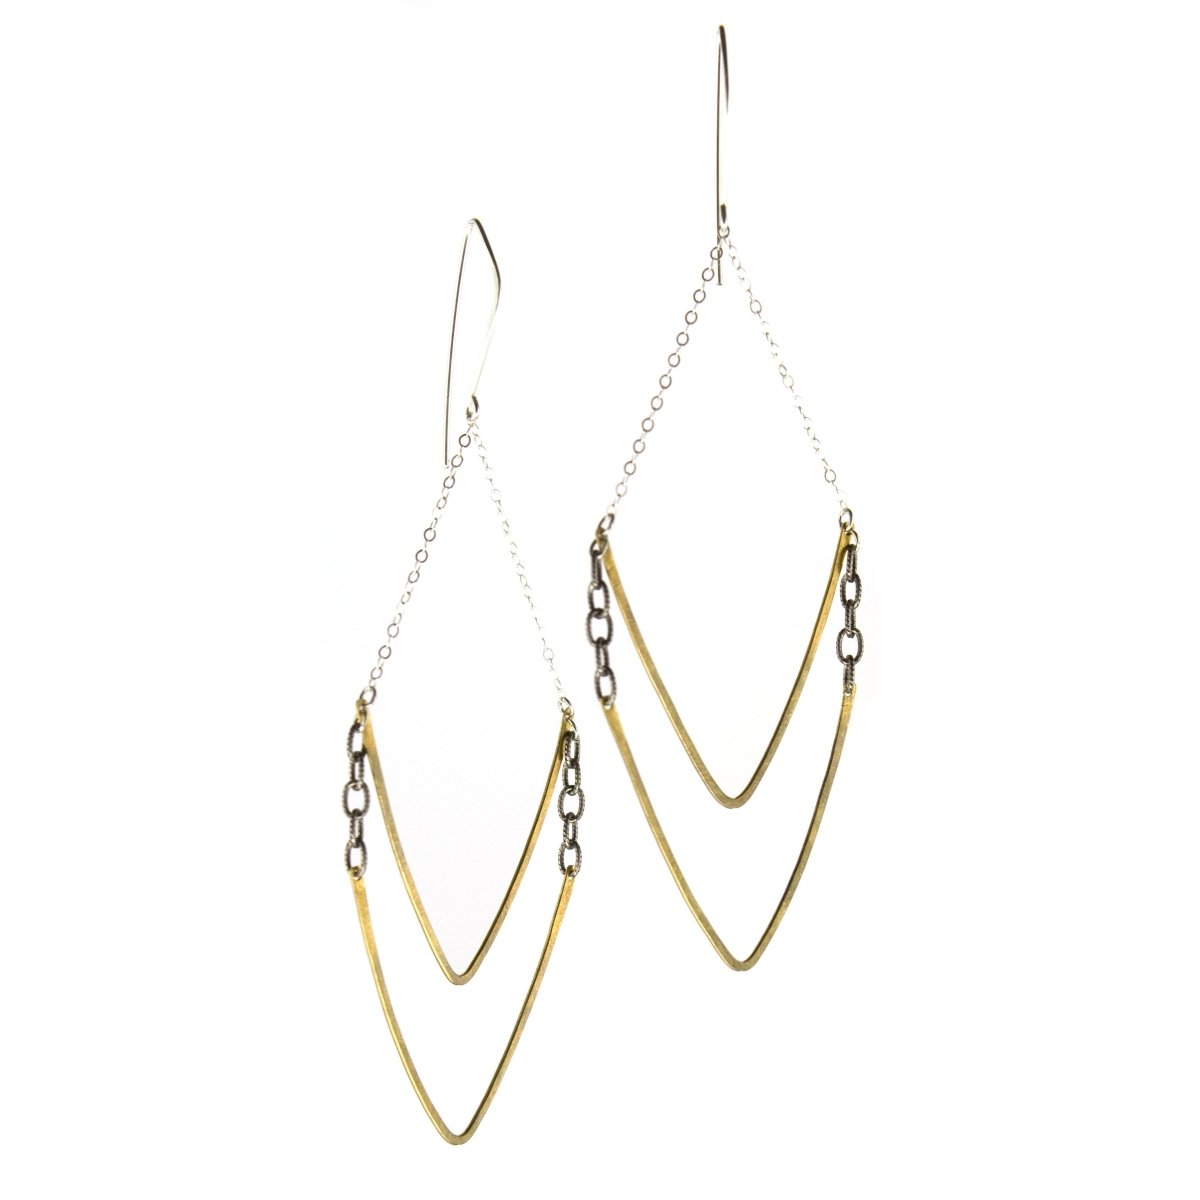 betsy & iya Double V earrings with hand pounded geometric inspired shapes.